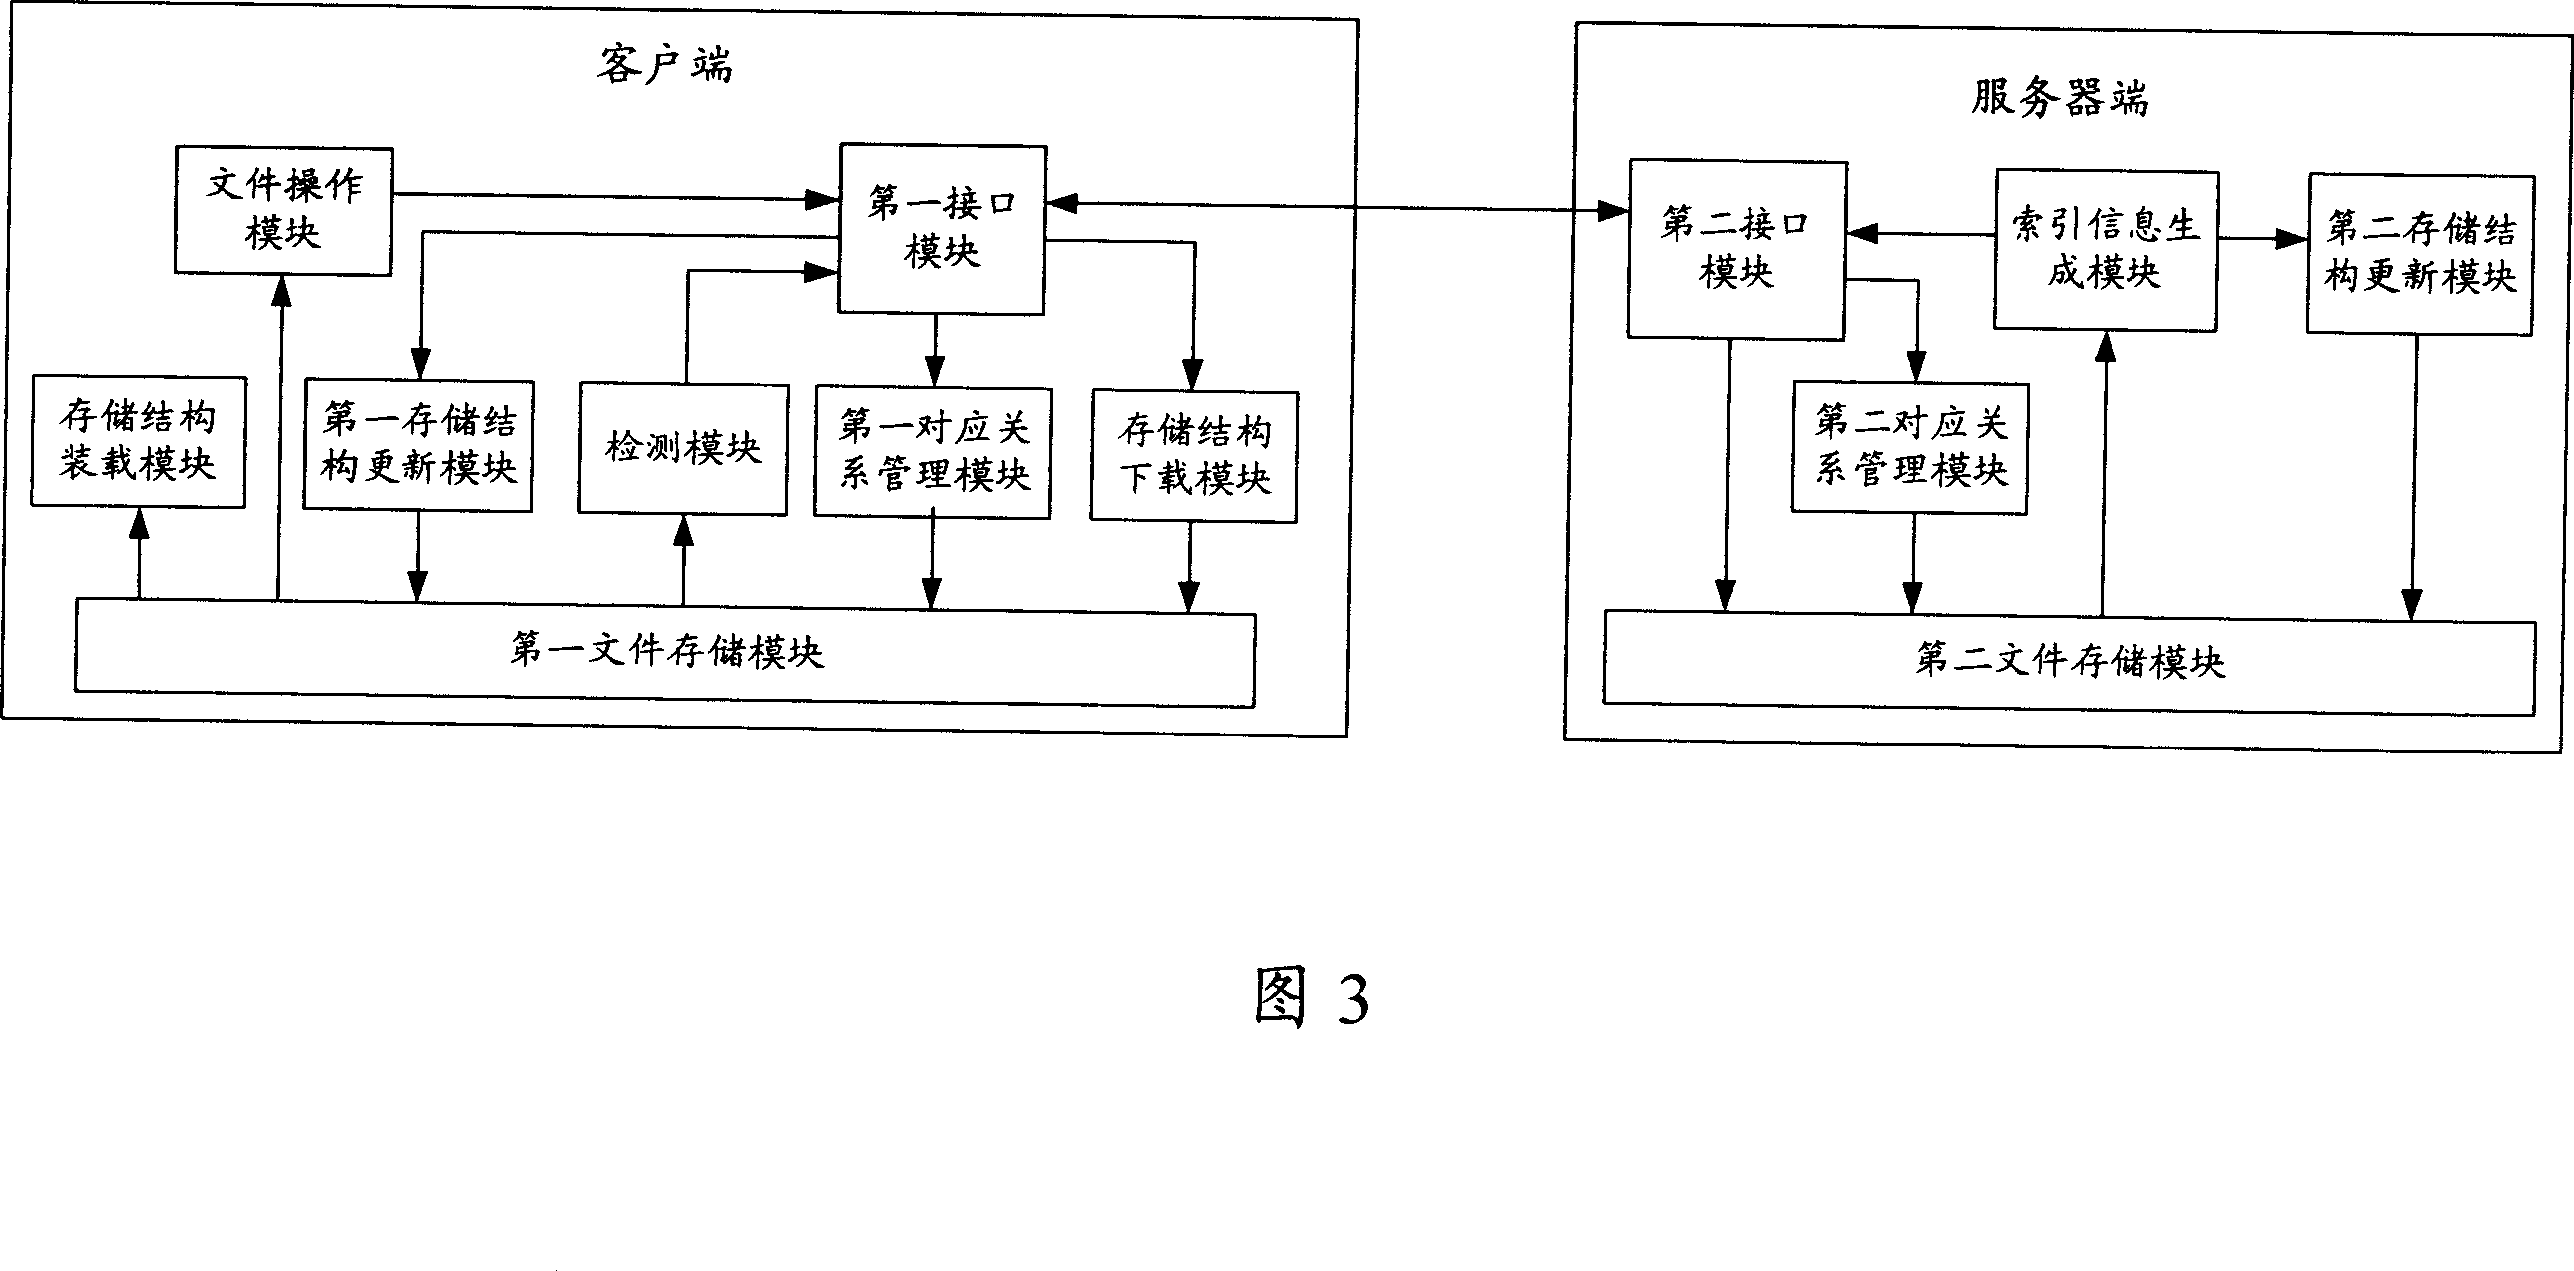 Synchronous method, system for file storage and customer terminal